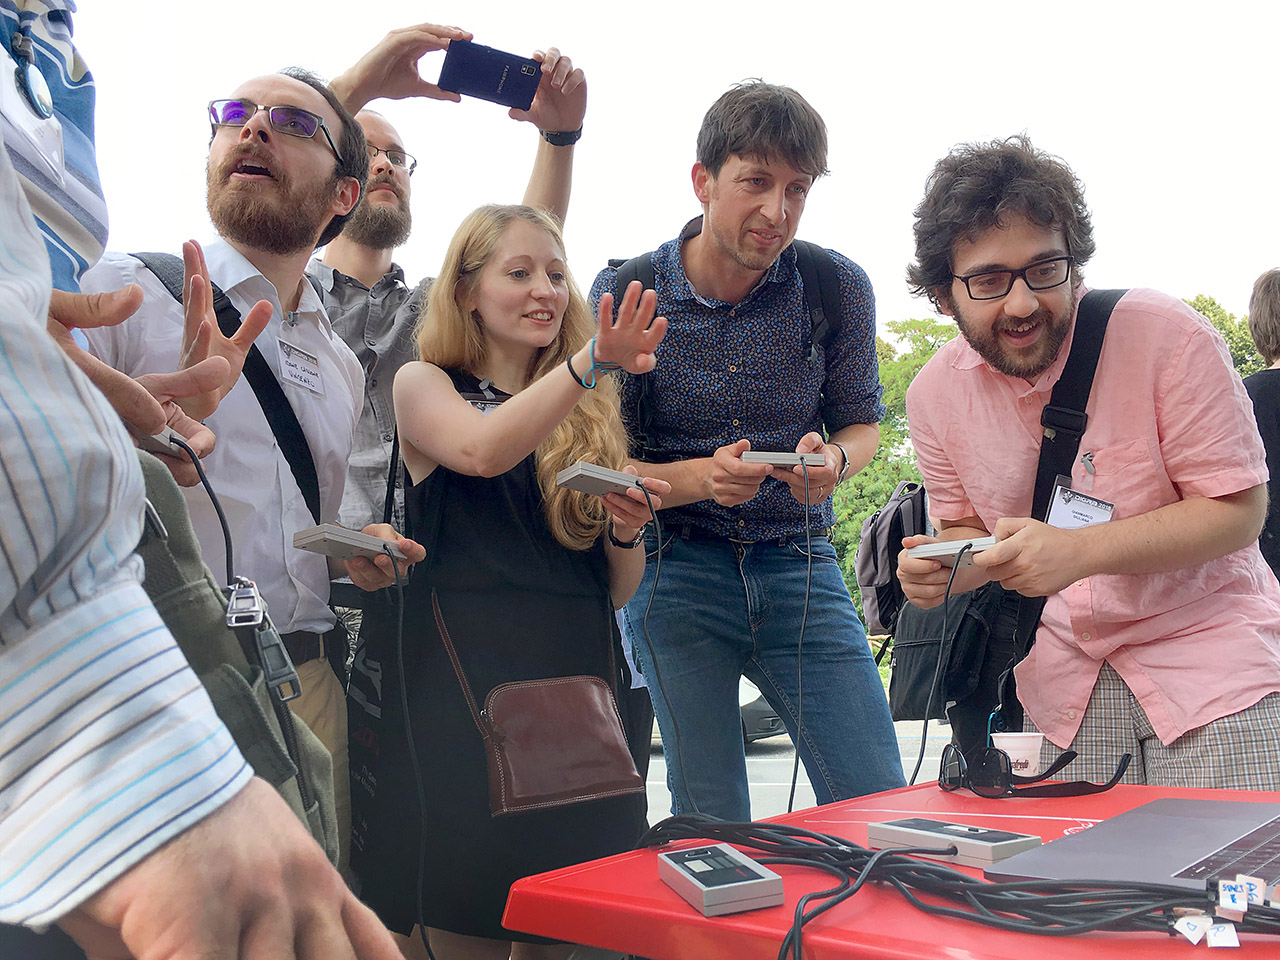 A crowd of people playing together at the DiGRA 2018 academic conference in Turin, Italy.